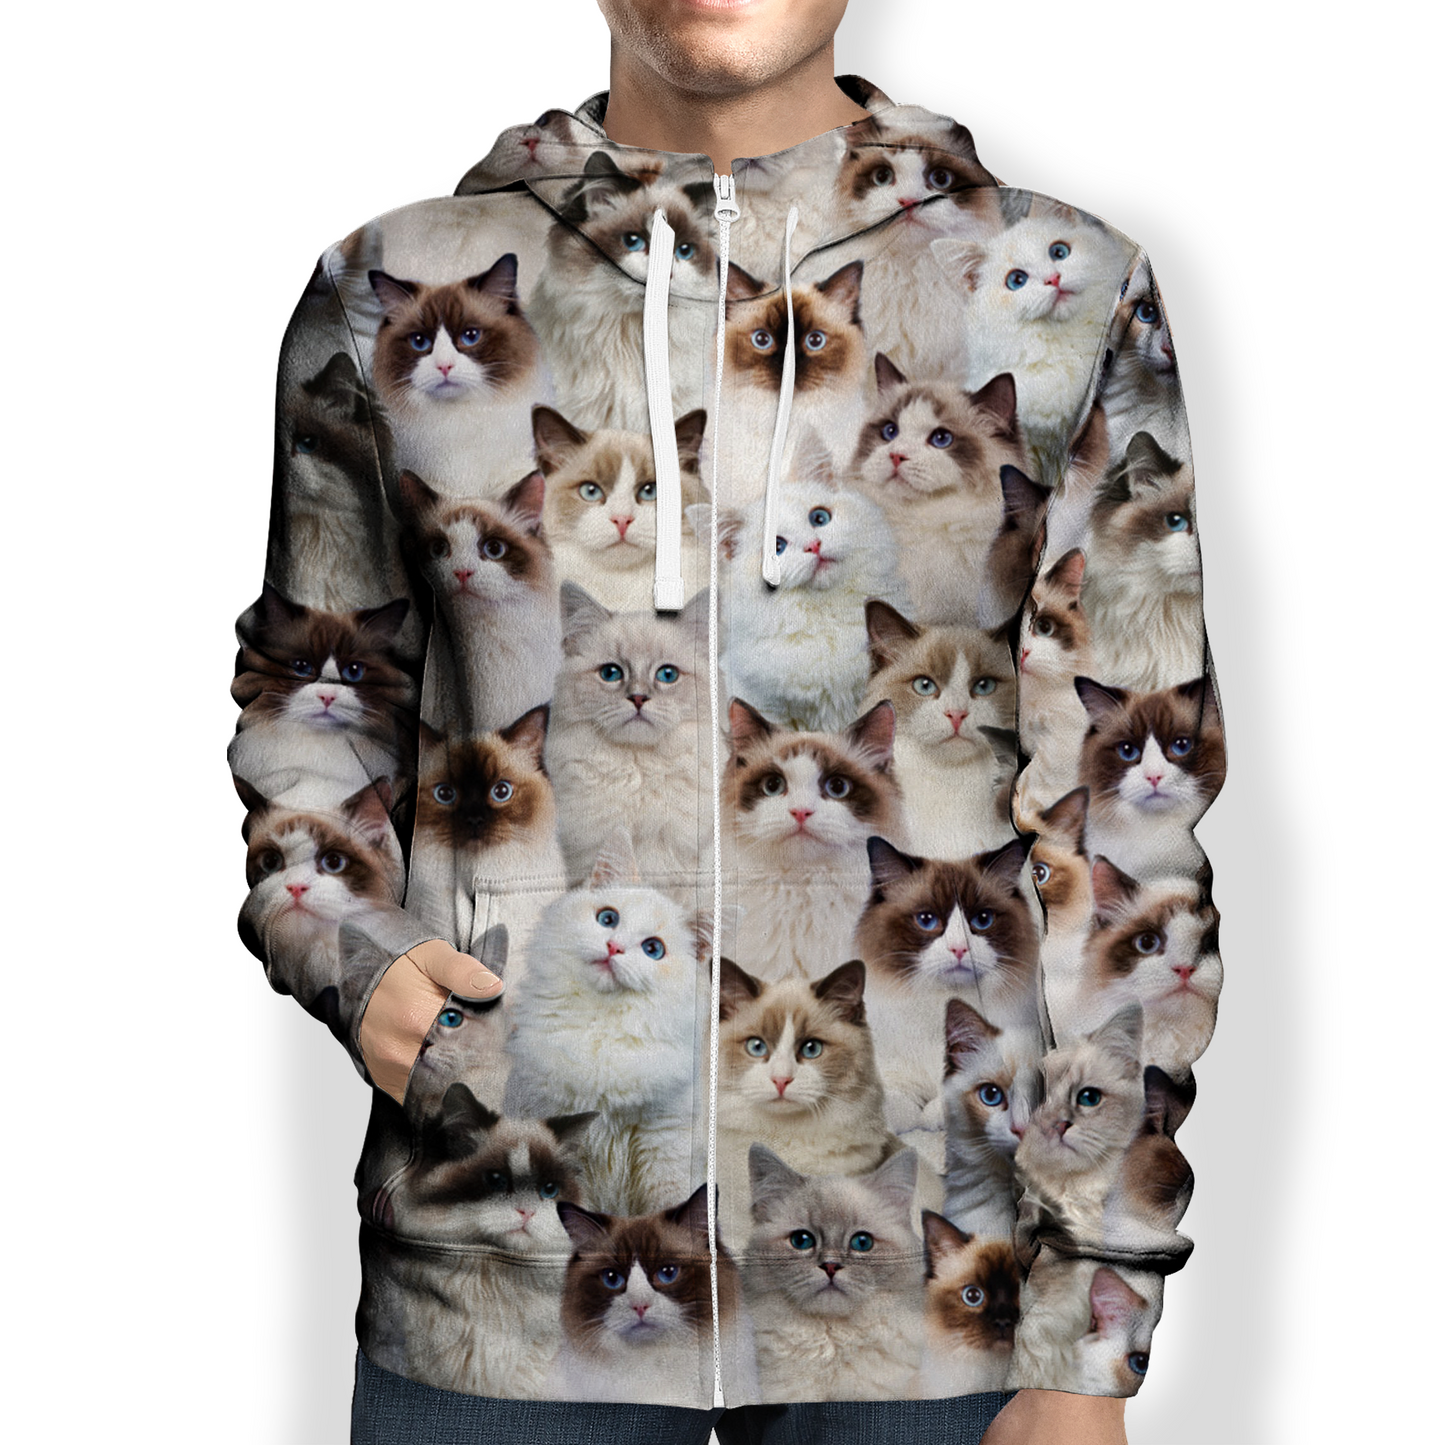 You Will Have A Bunch Of Ragdoll Cats - Hoodie V1